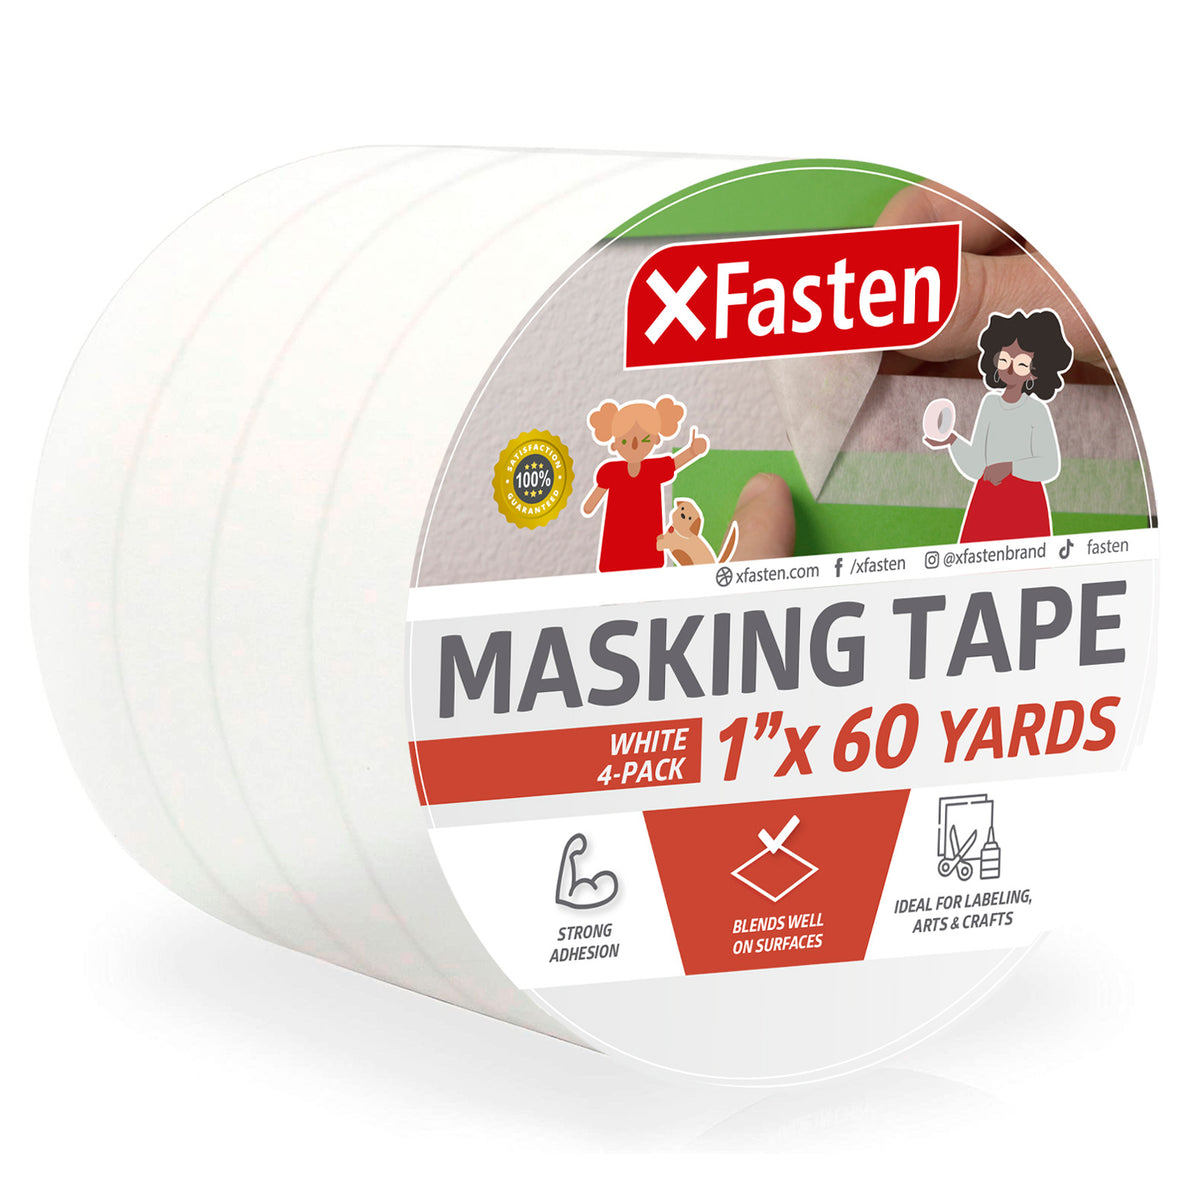 XFasten Masking Tape, White, Inches x 60 Yards, Pack of